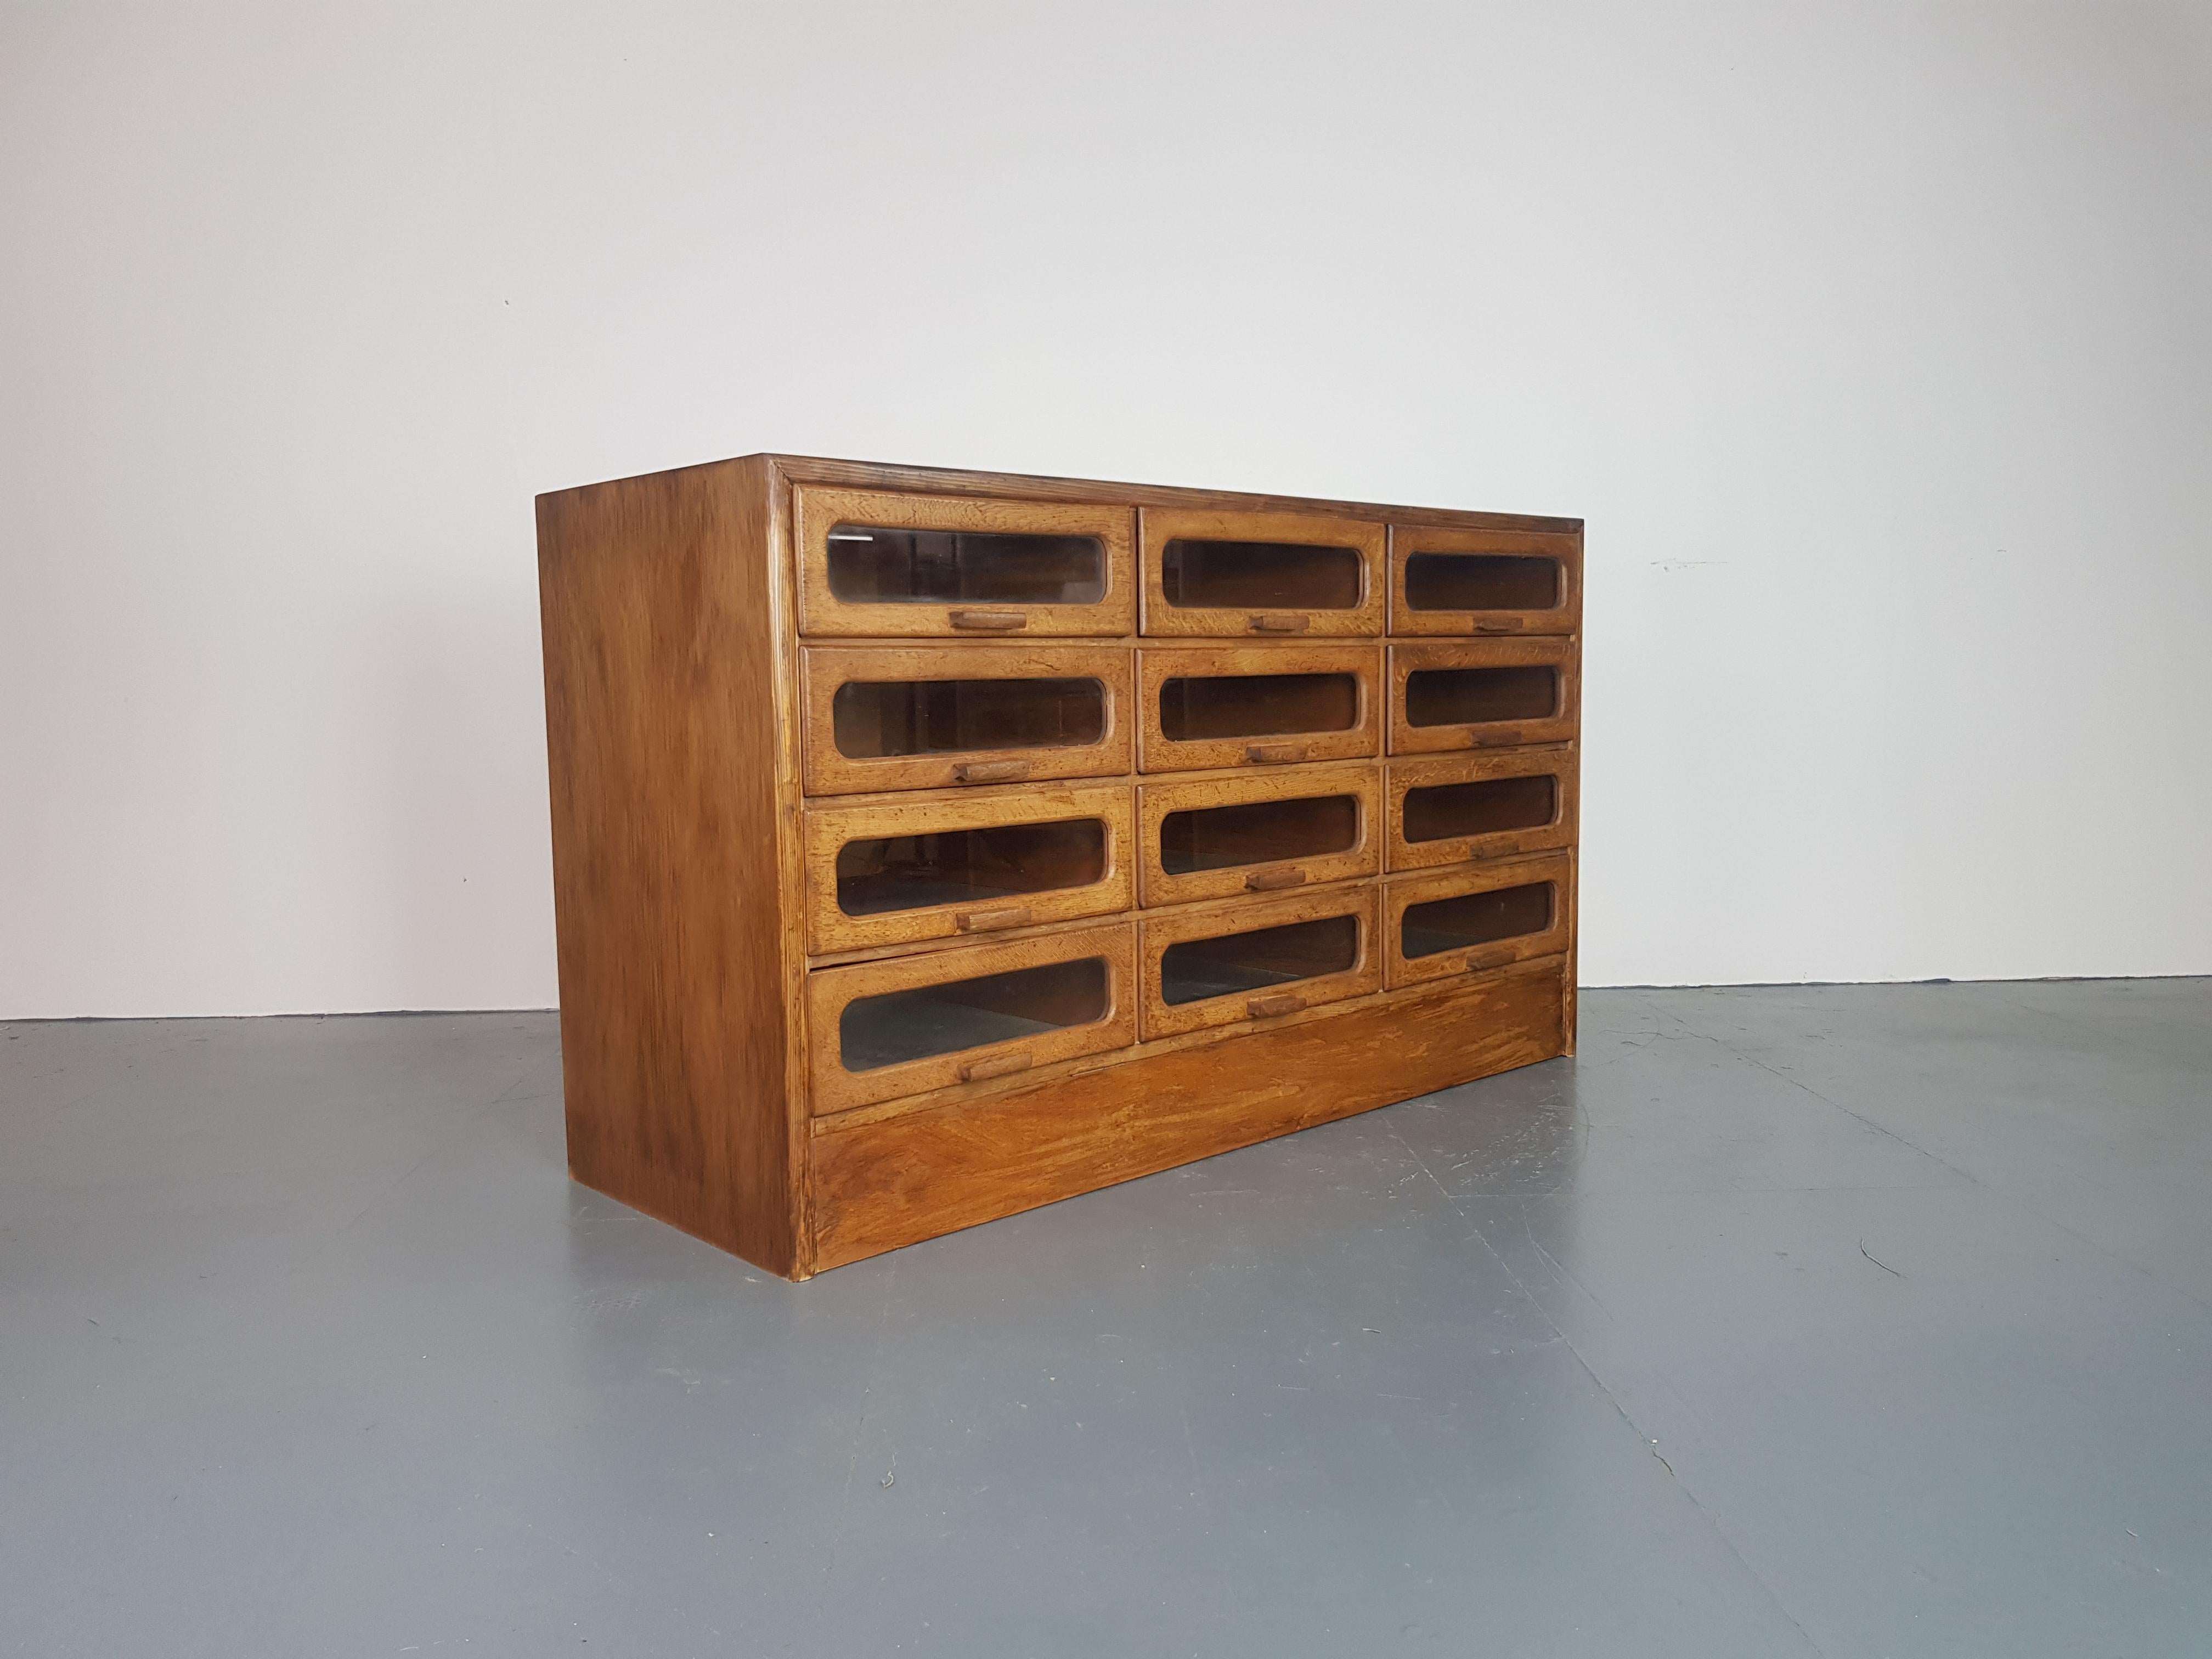 Lovely 12-drawer haberdashery shop cabinet from the first half of the last century. 

It has 12 glass fronted drawers all with original wooden handles.

Approximate dimensions:

Width 138cm

Depth 51cm

Height 80cm

Drawers 40 W cm x 12